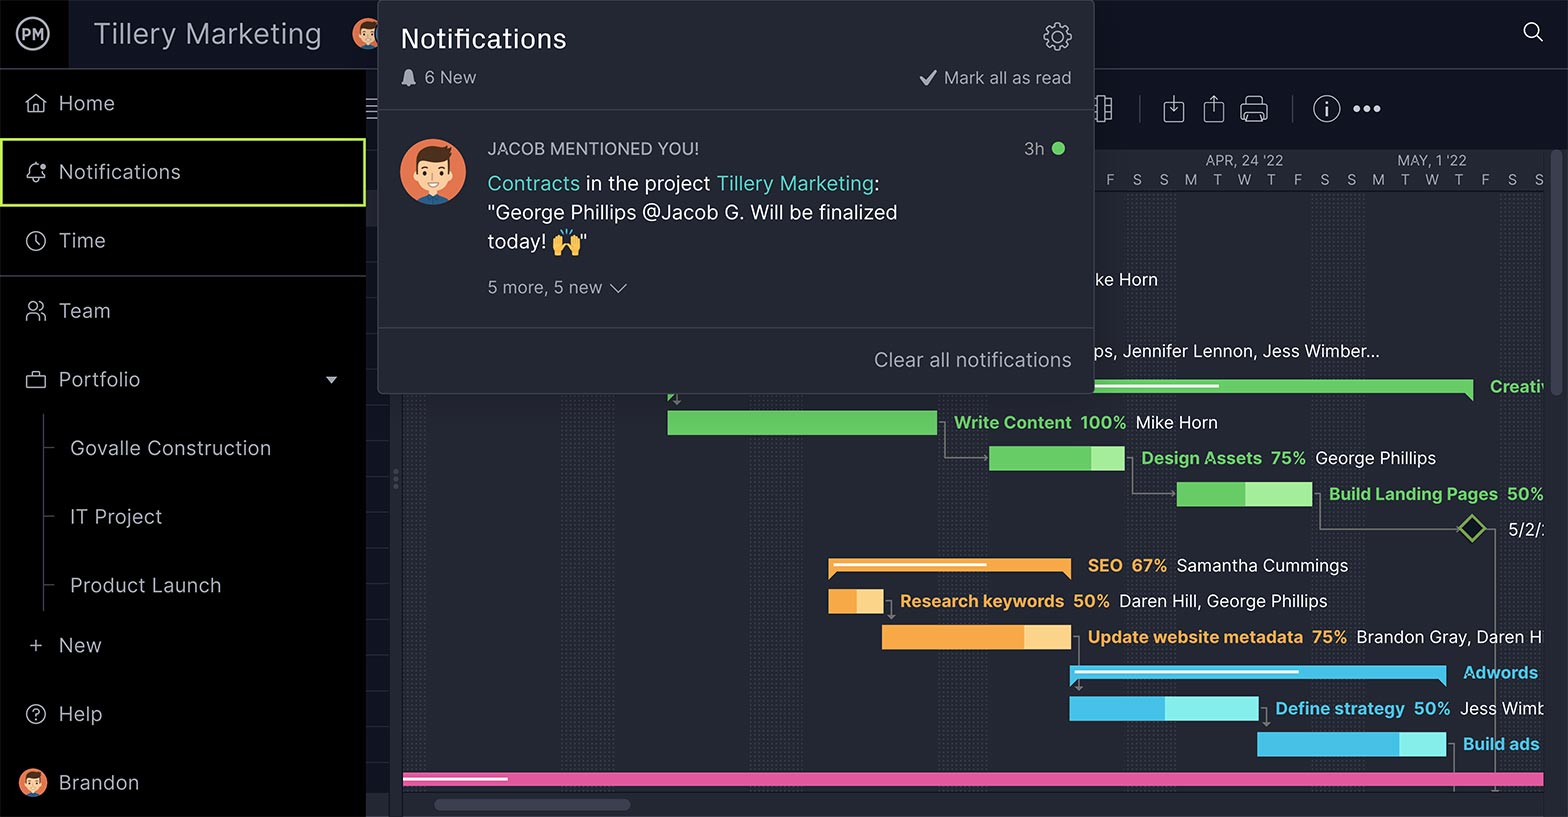 ProjectManager's notifications